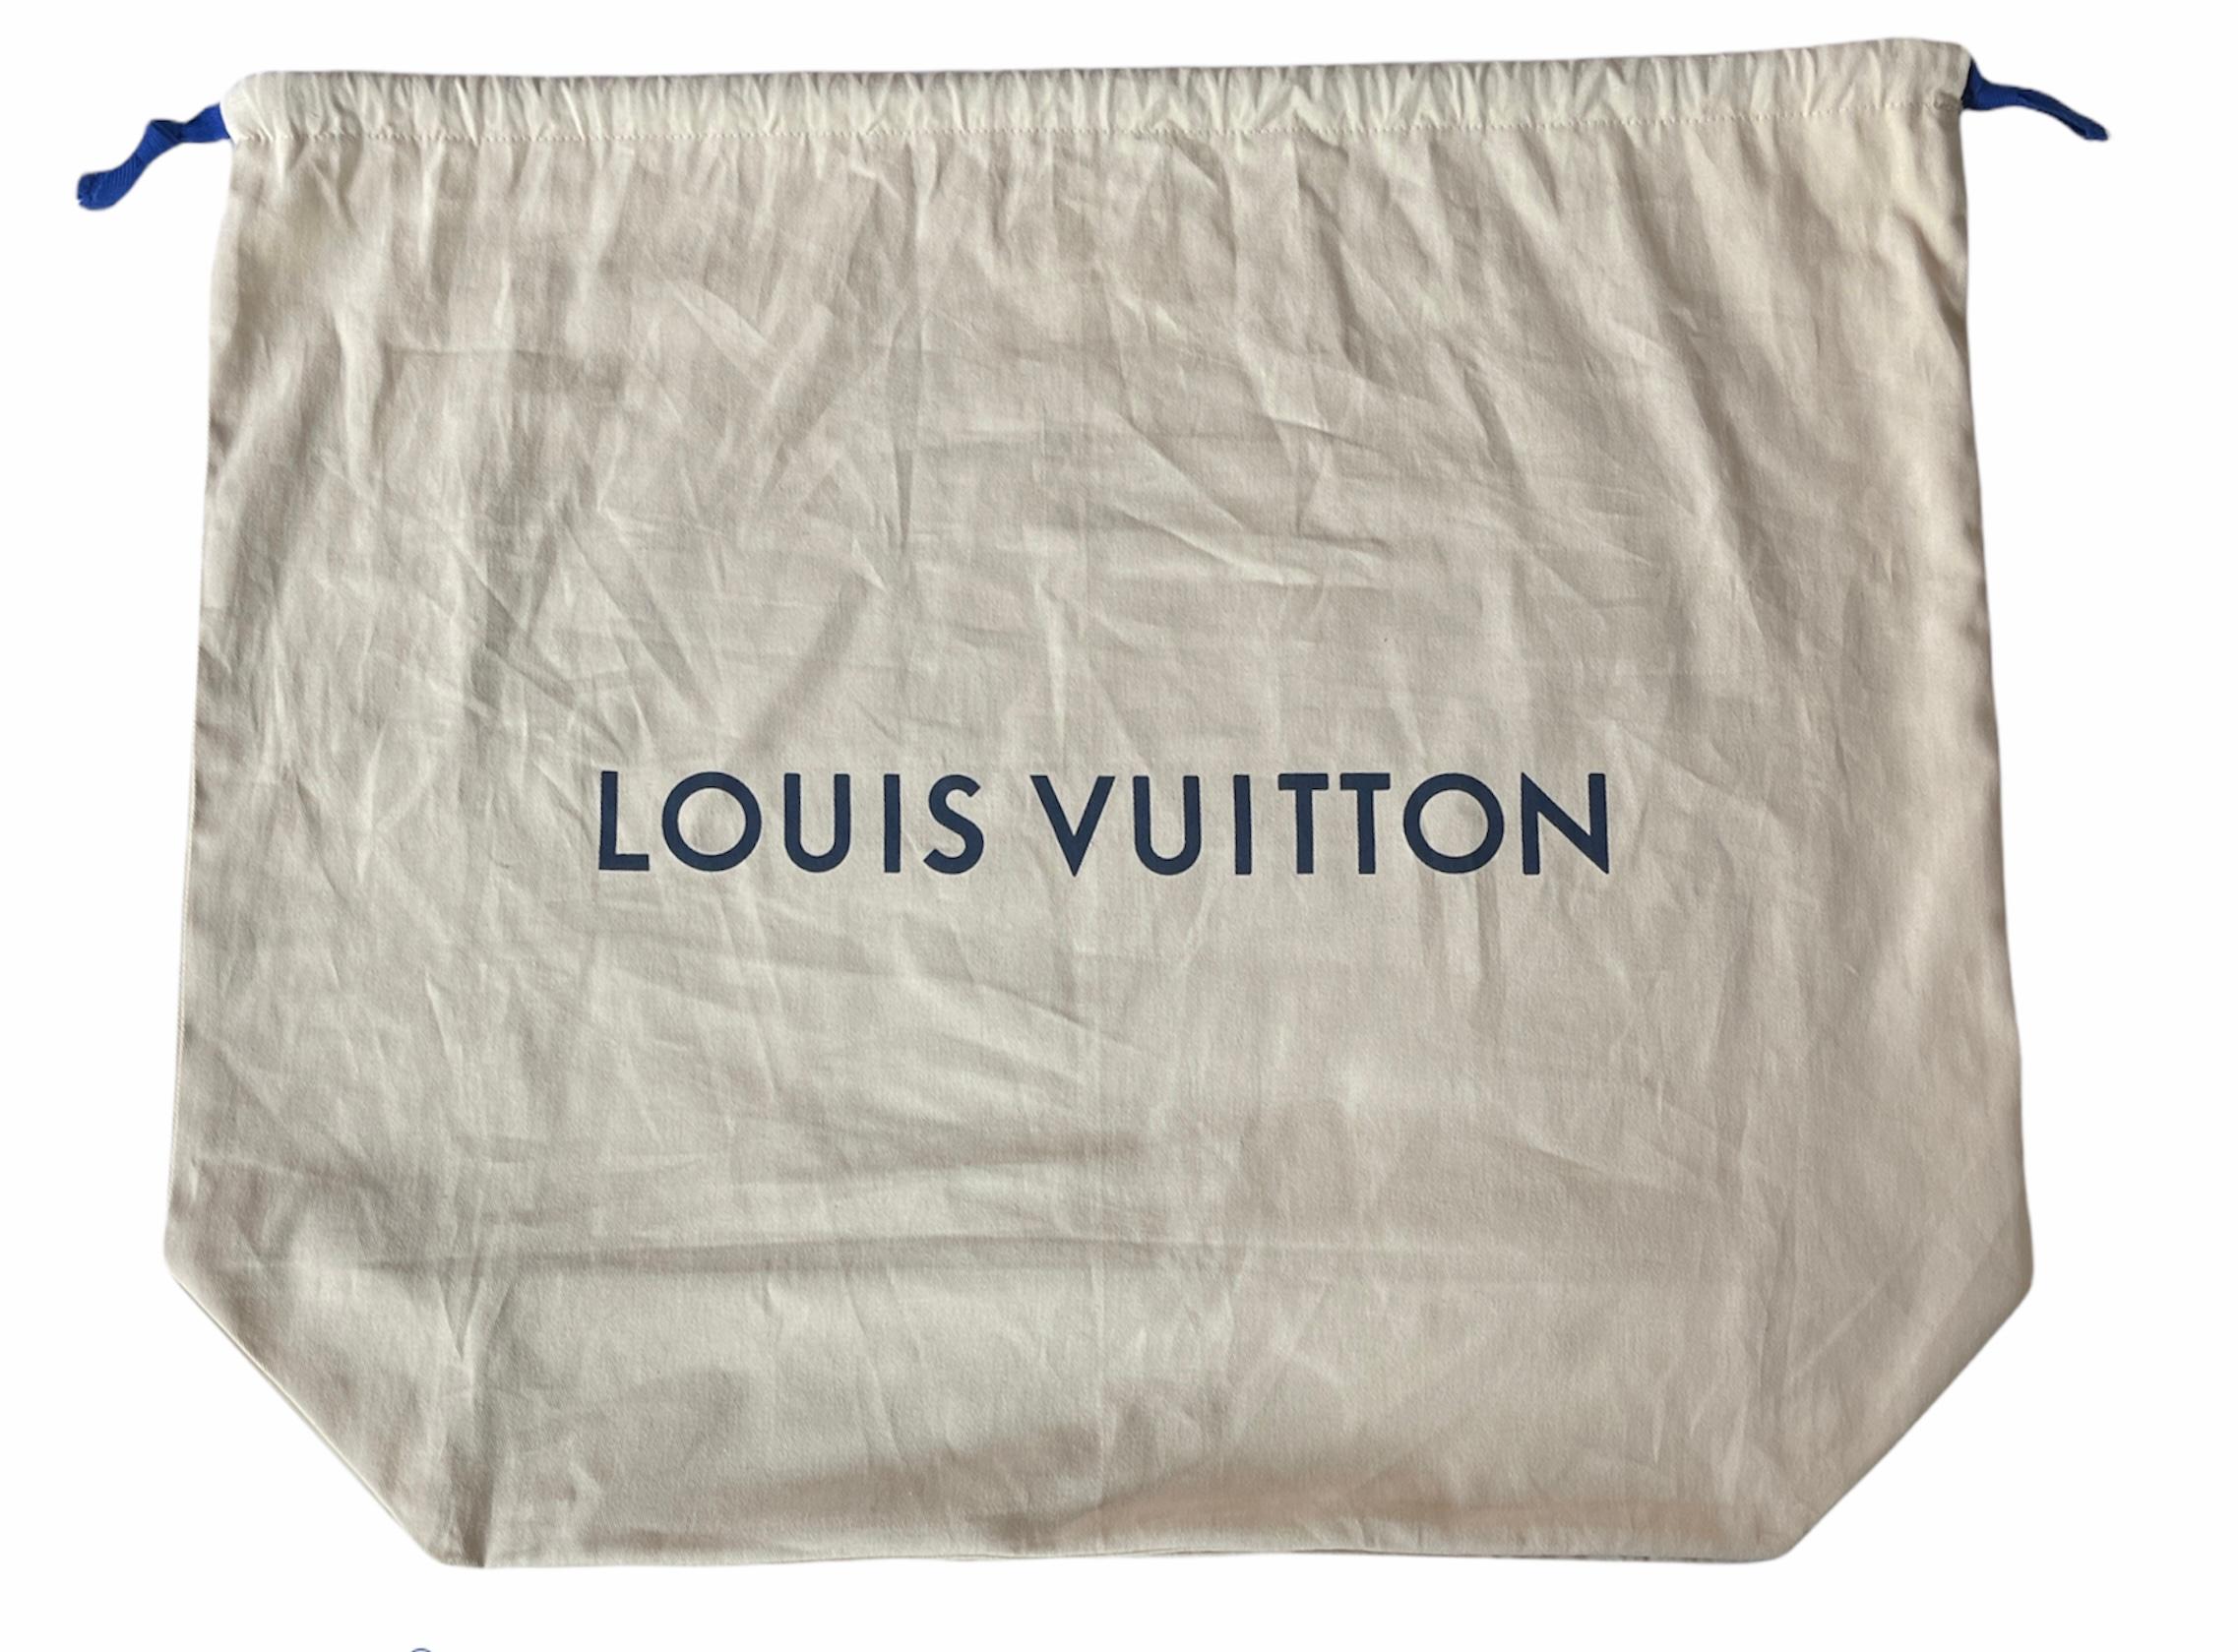 Louis Vuitton NEW 2021 Monogram Giant Brume By The Pool Onthego GM Tote Bag 6